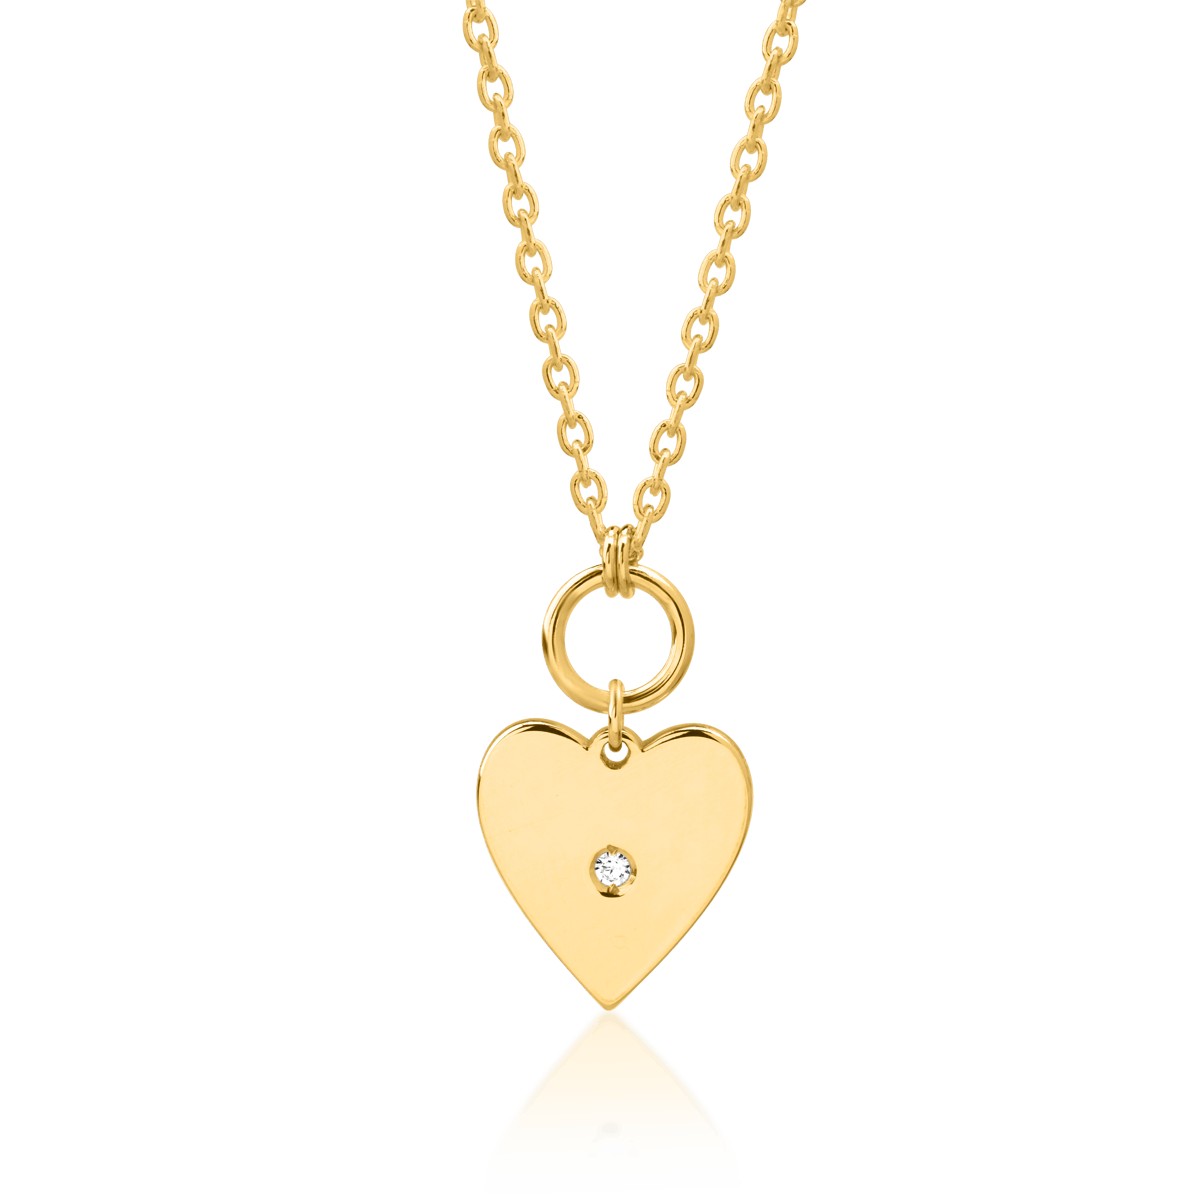 14K yellow gold necklace with heart pendant